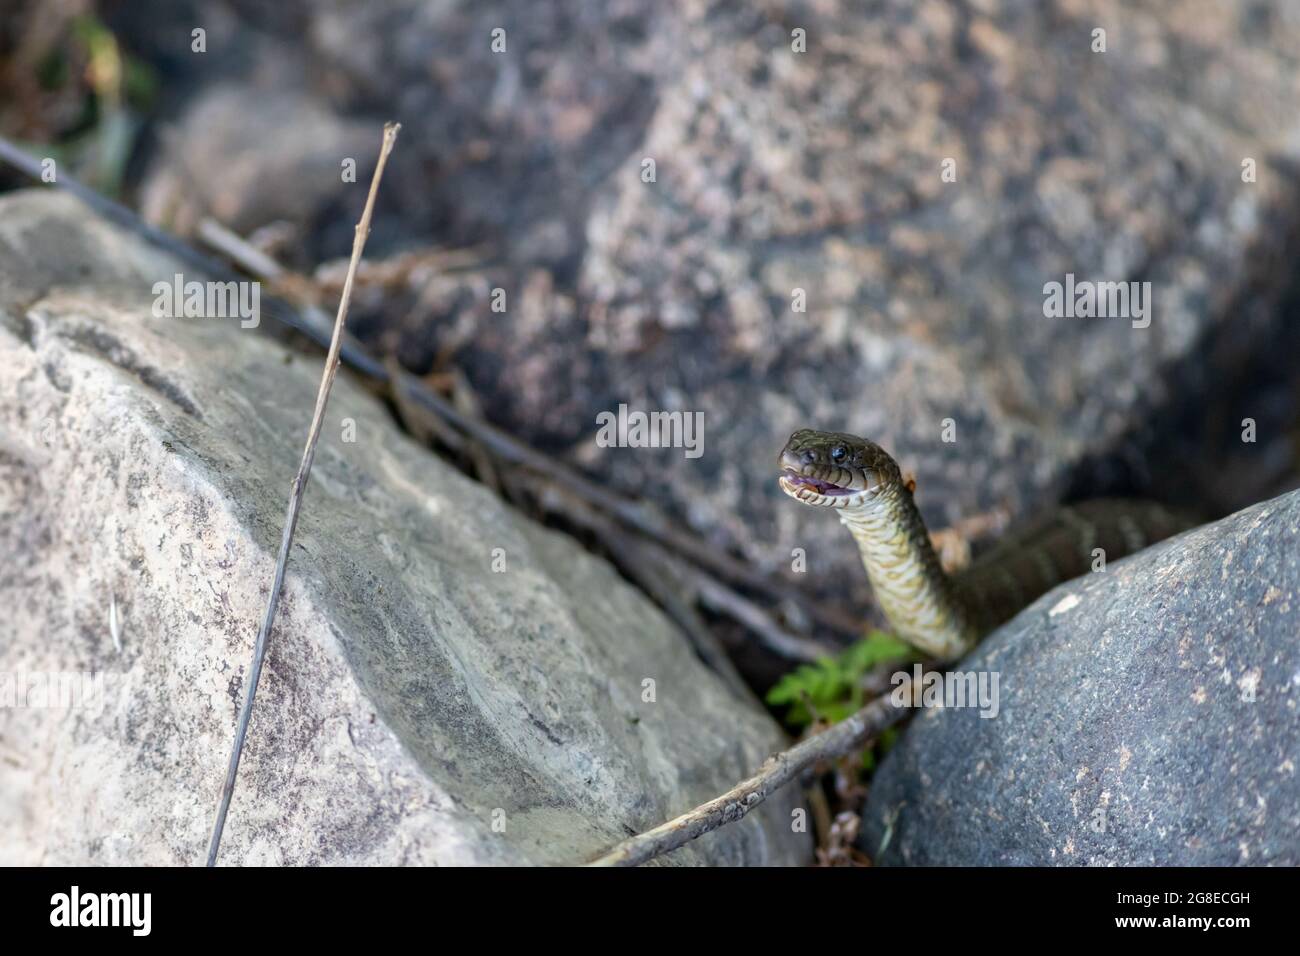 A northern water snake (Nerodia sipedon sipedon) has raised its head with its mouth slightly open between large rocks. Stock Photo